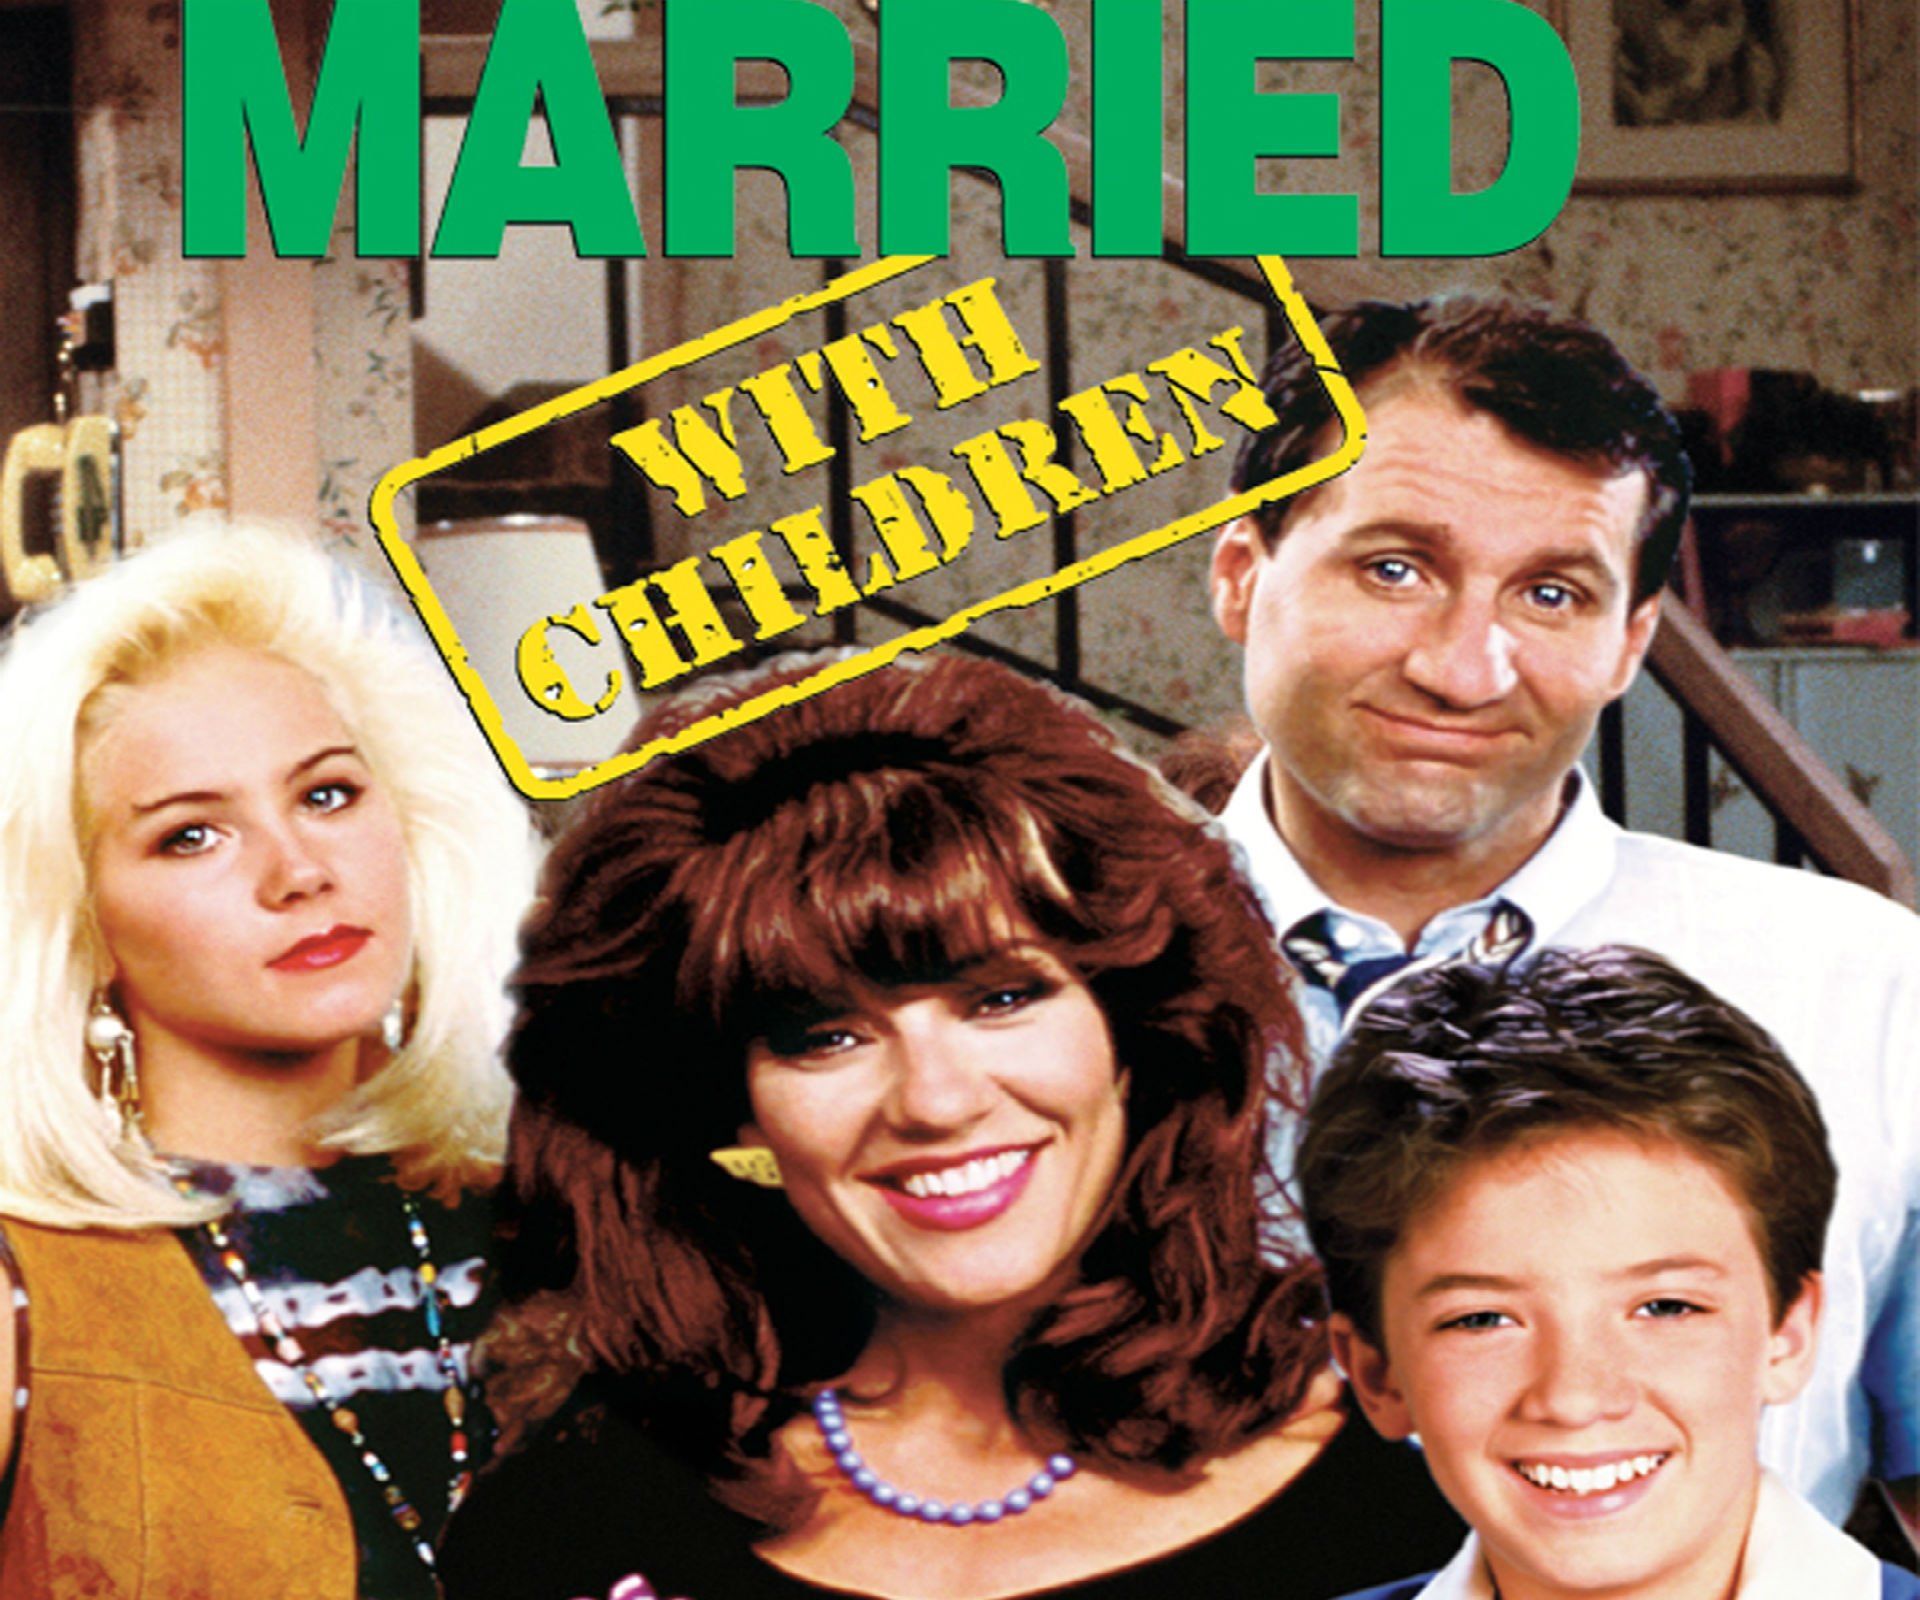 MARRIED WITH CHILDREN Comedy Sitcom Series Television Married Children Poster Wallpaperx1600